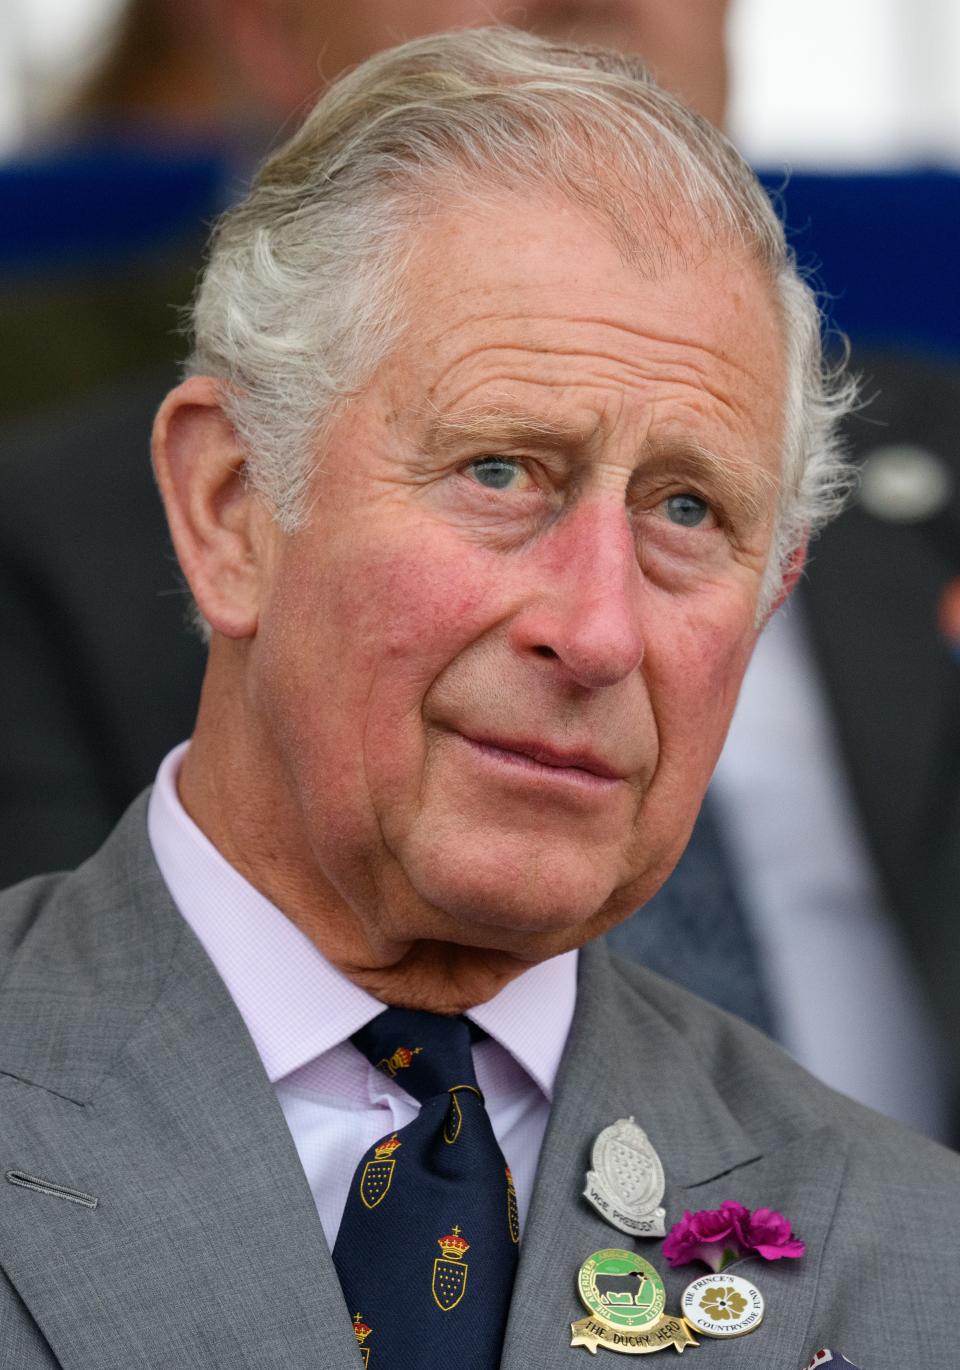 Prince Charles has been asked to provide a witness statement in the inquiry. Photo: Getty